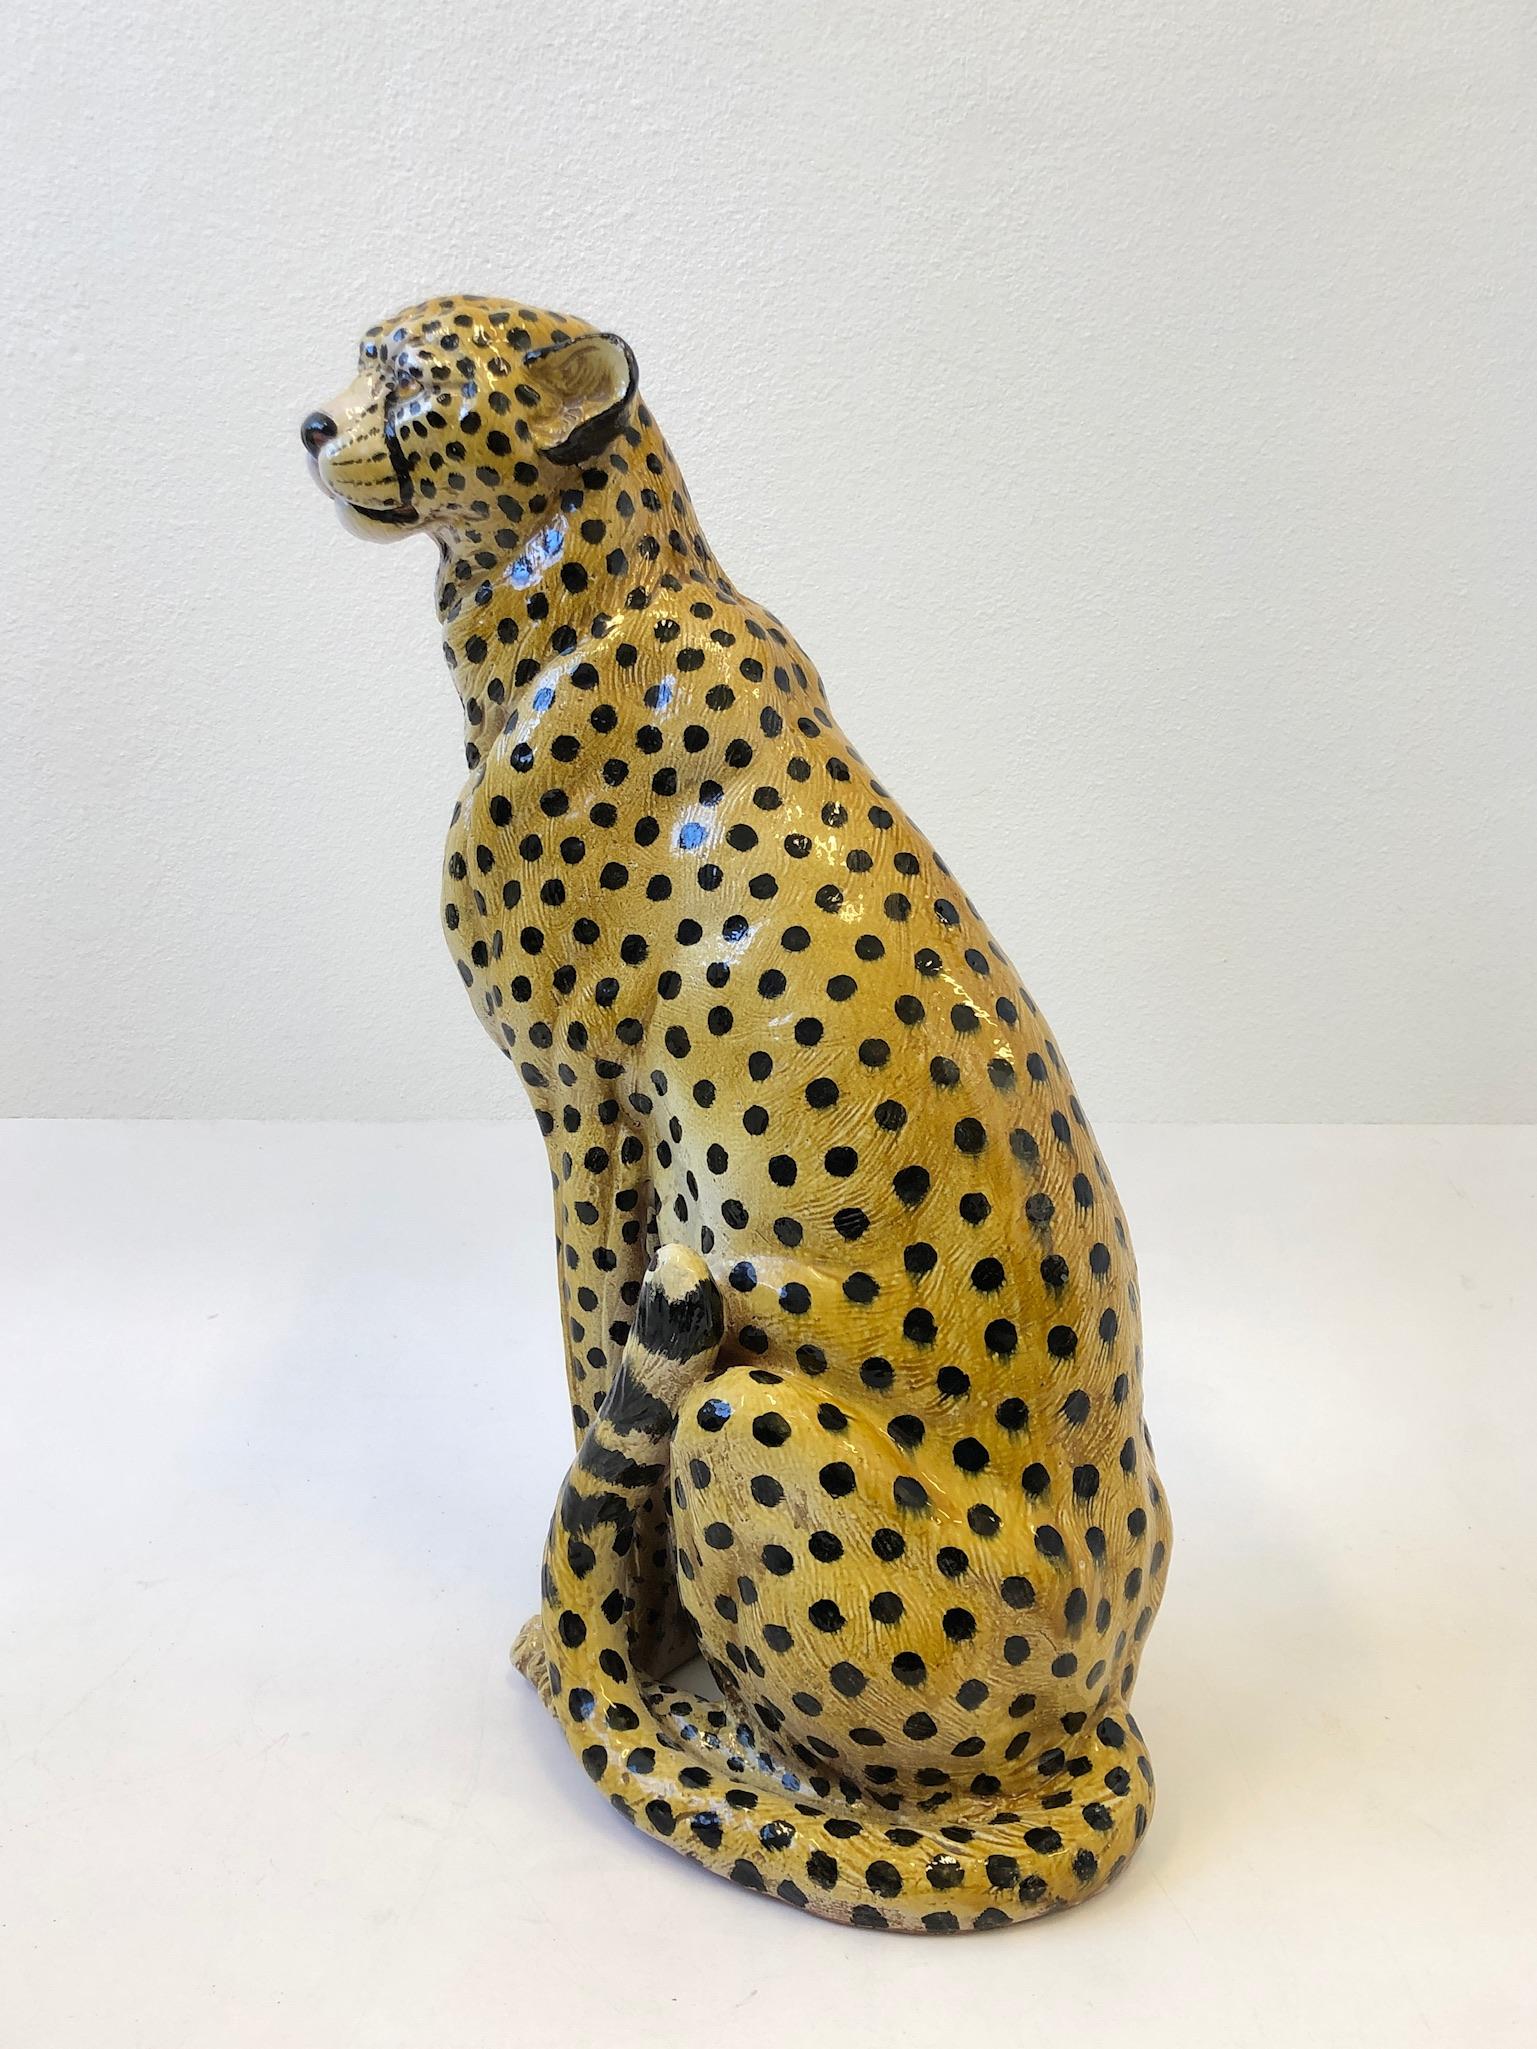 Large Italian ceramic hand painted cheetah sculpture from the 1960s. The sculpture is in beautiful condition with minor wear consistent with age (see detail photos).

Measurements: 30.5” high, 20” wide and 12” deep.